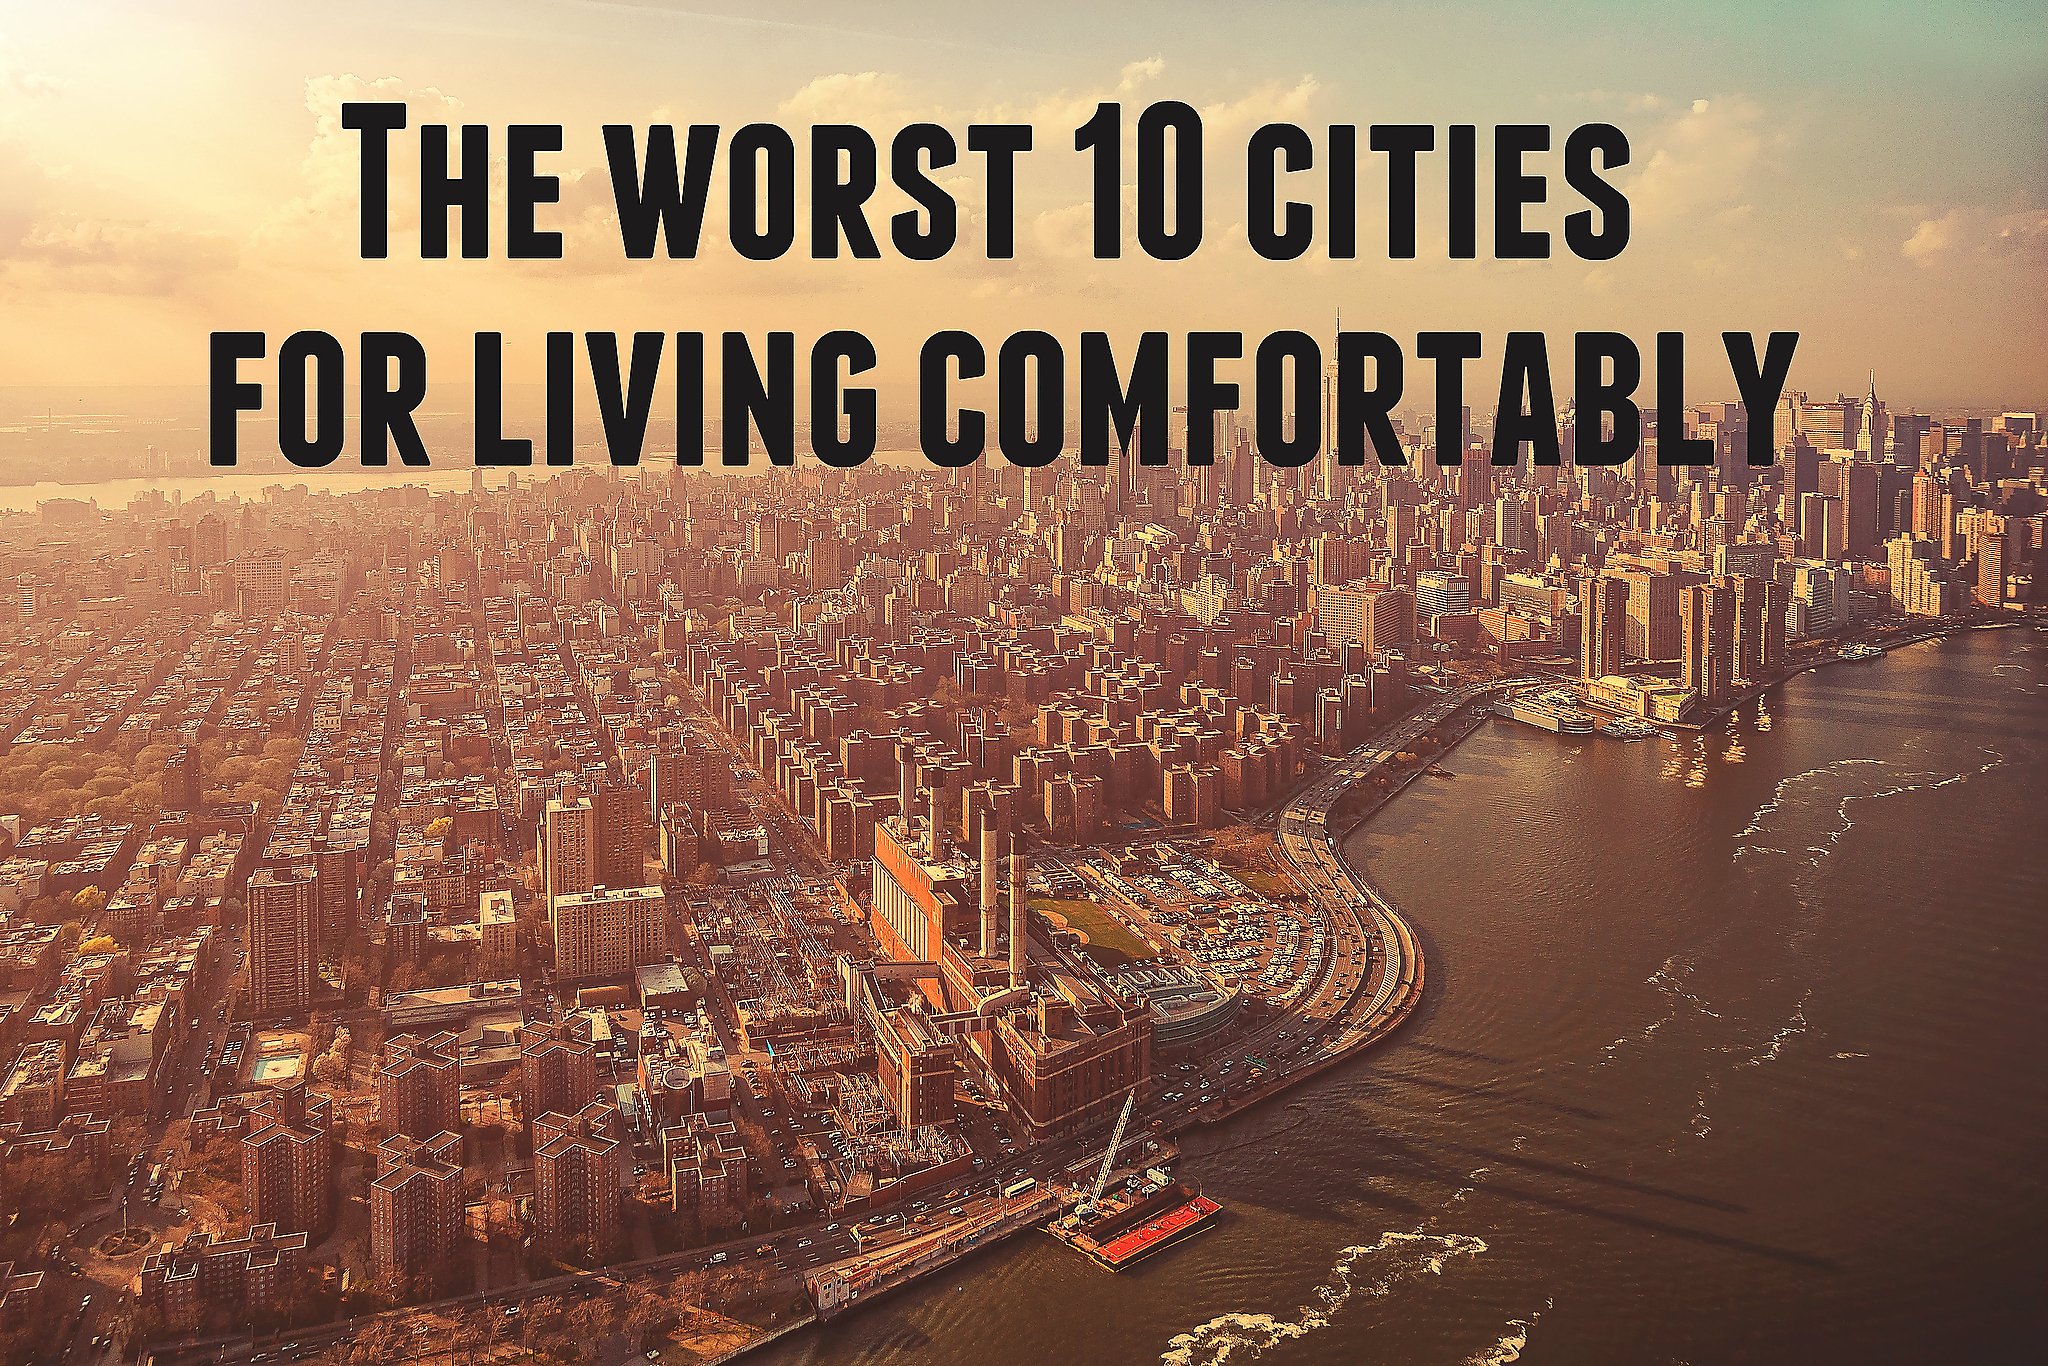 Best Cities for Living. Living for the City. City Living problems. Worst City for Living. This city life